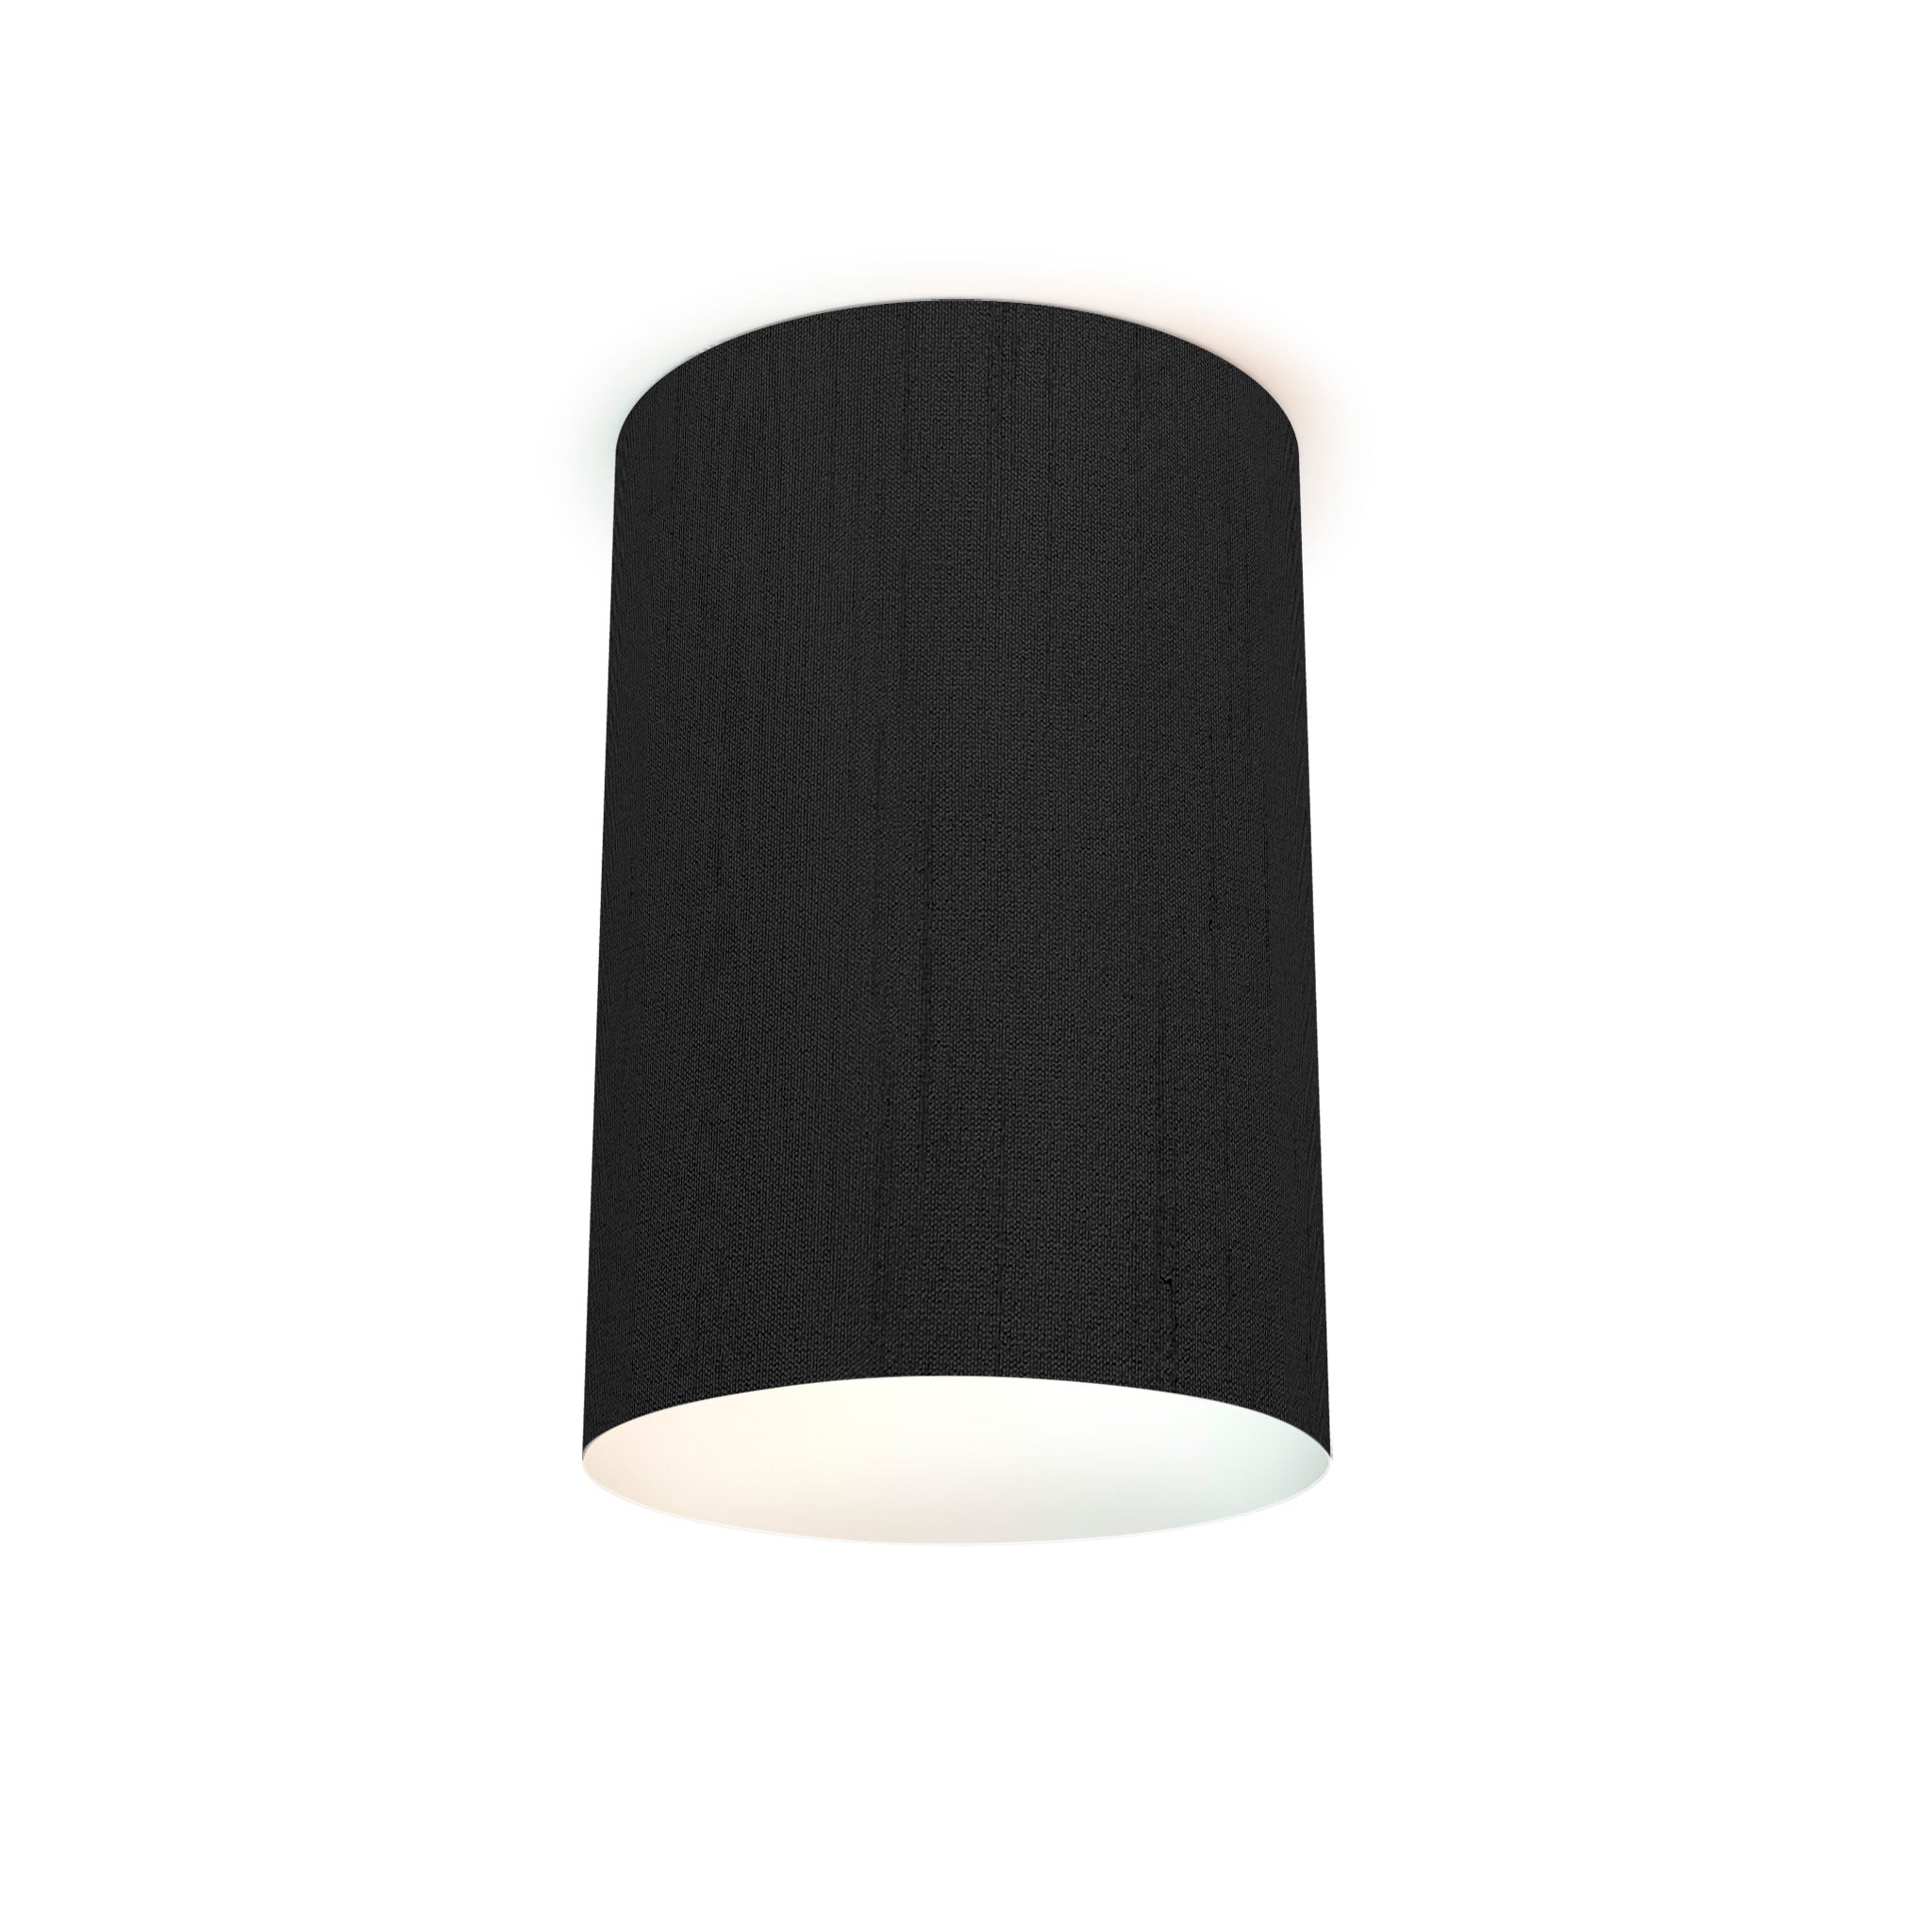 The Lily Flush Mount from Seascape Fixtures in silk, ebony color.